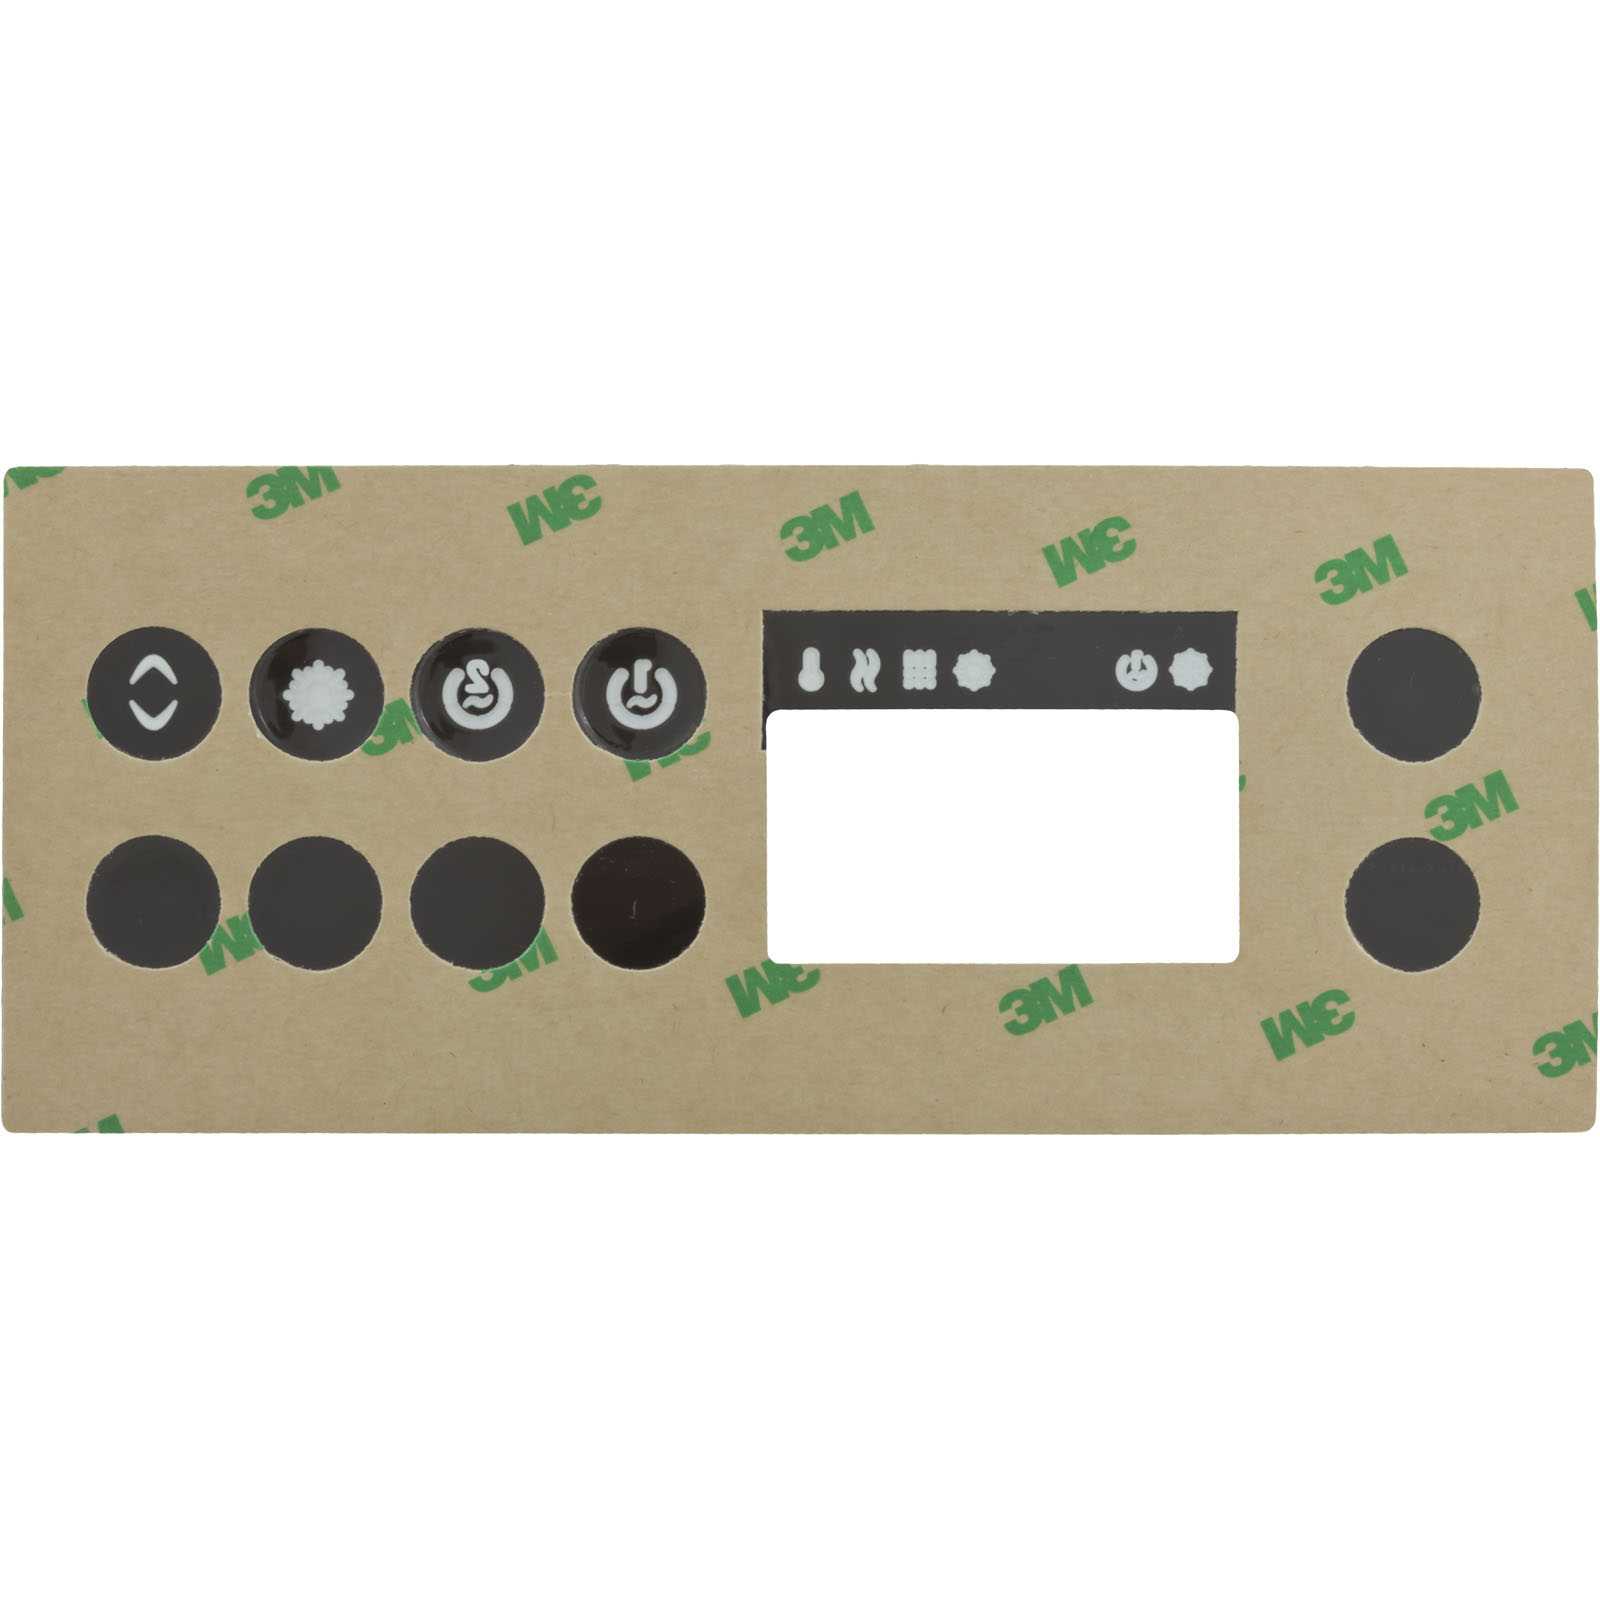 Picture of 9916-101204 Overlay Gecko K-19 AE 4 Button P1 P2 Lt